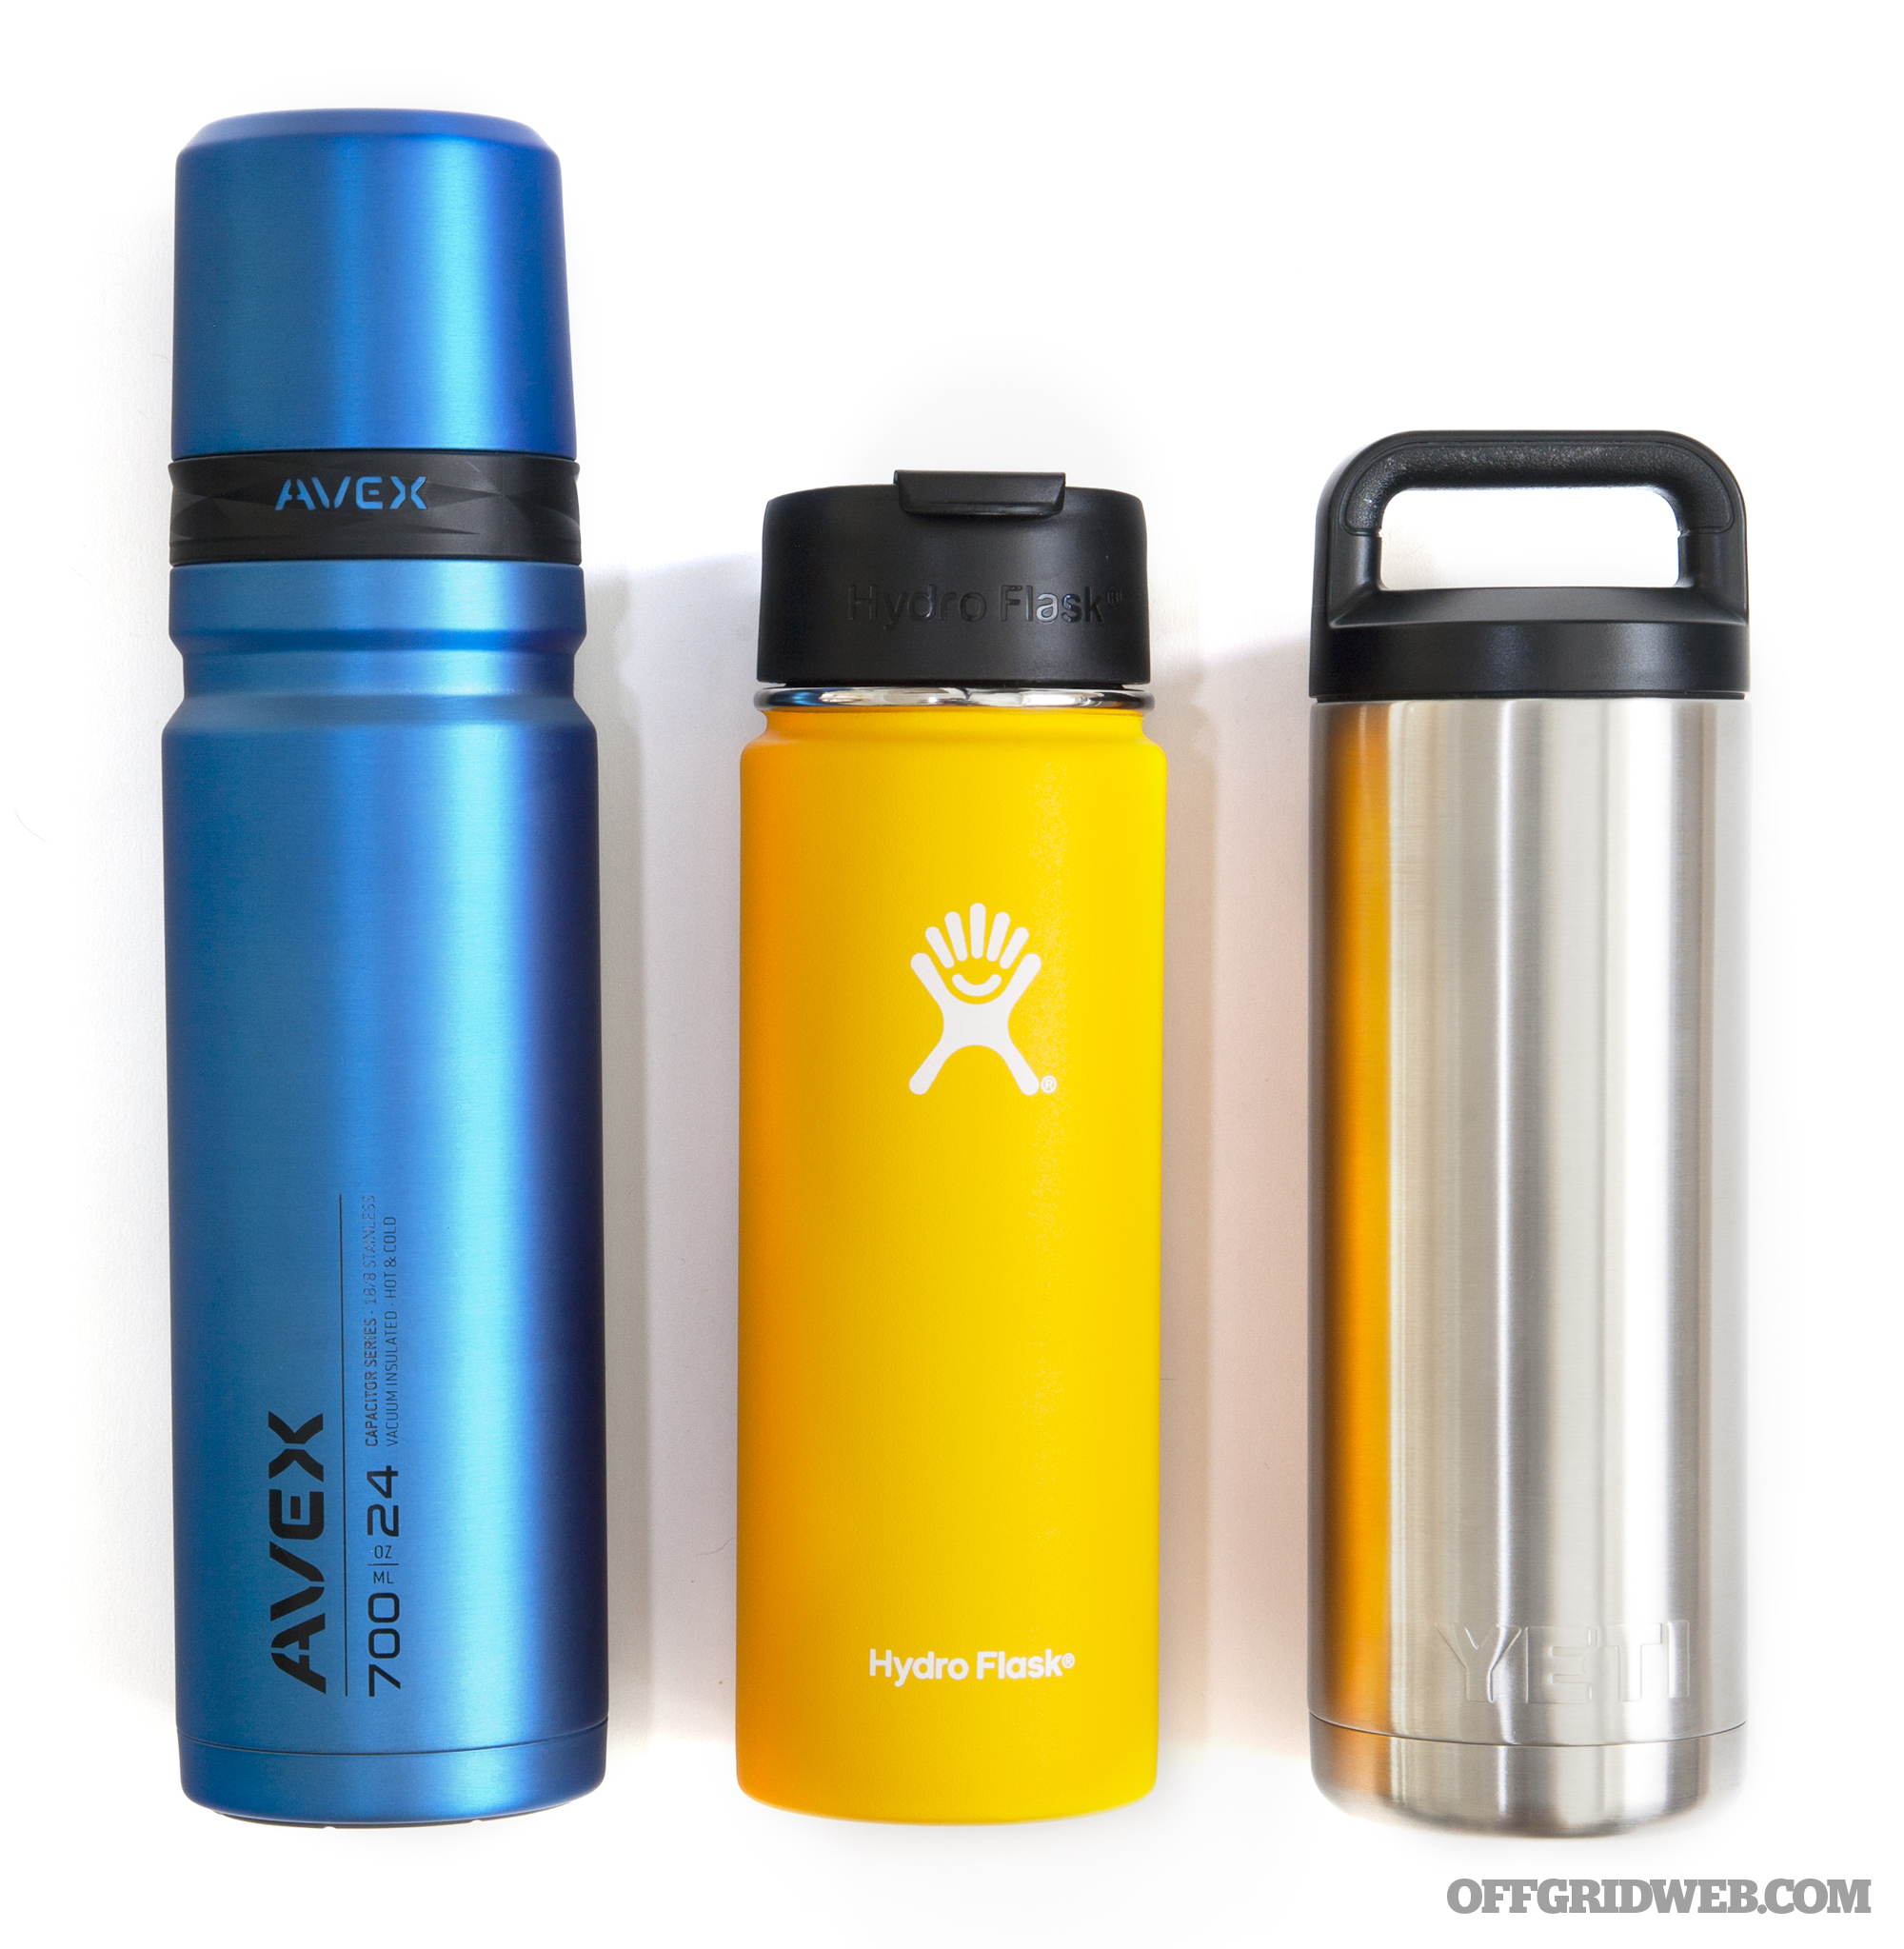 https://offgridweb.com/wp-content/uploads/2016/05/Insulated-Water-Bottles-buyers-guide-06.jpg